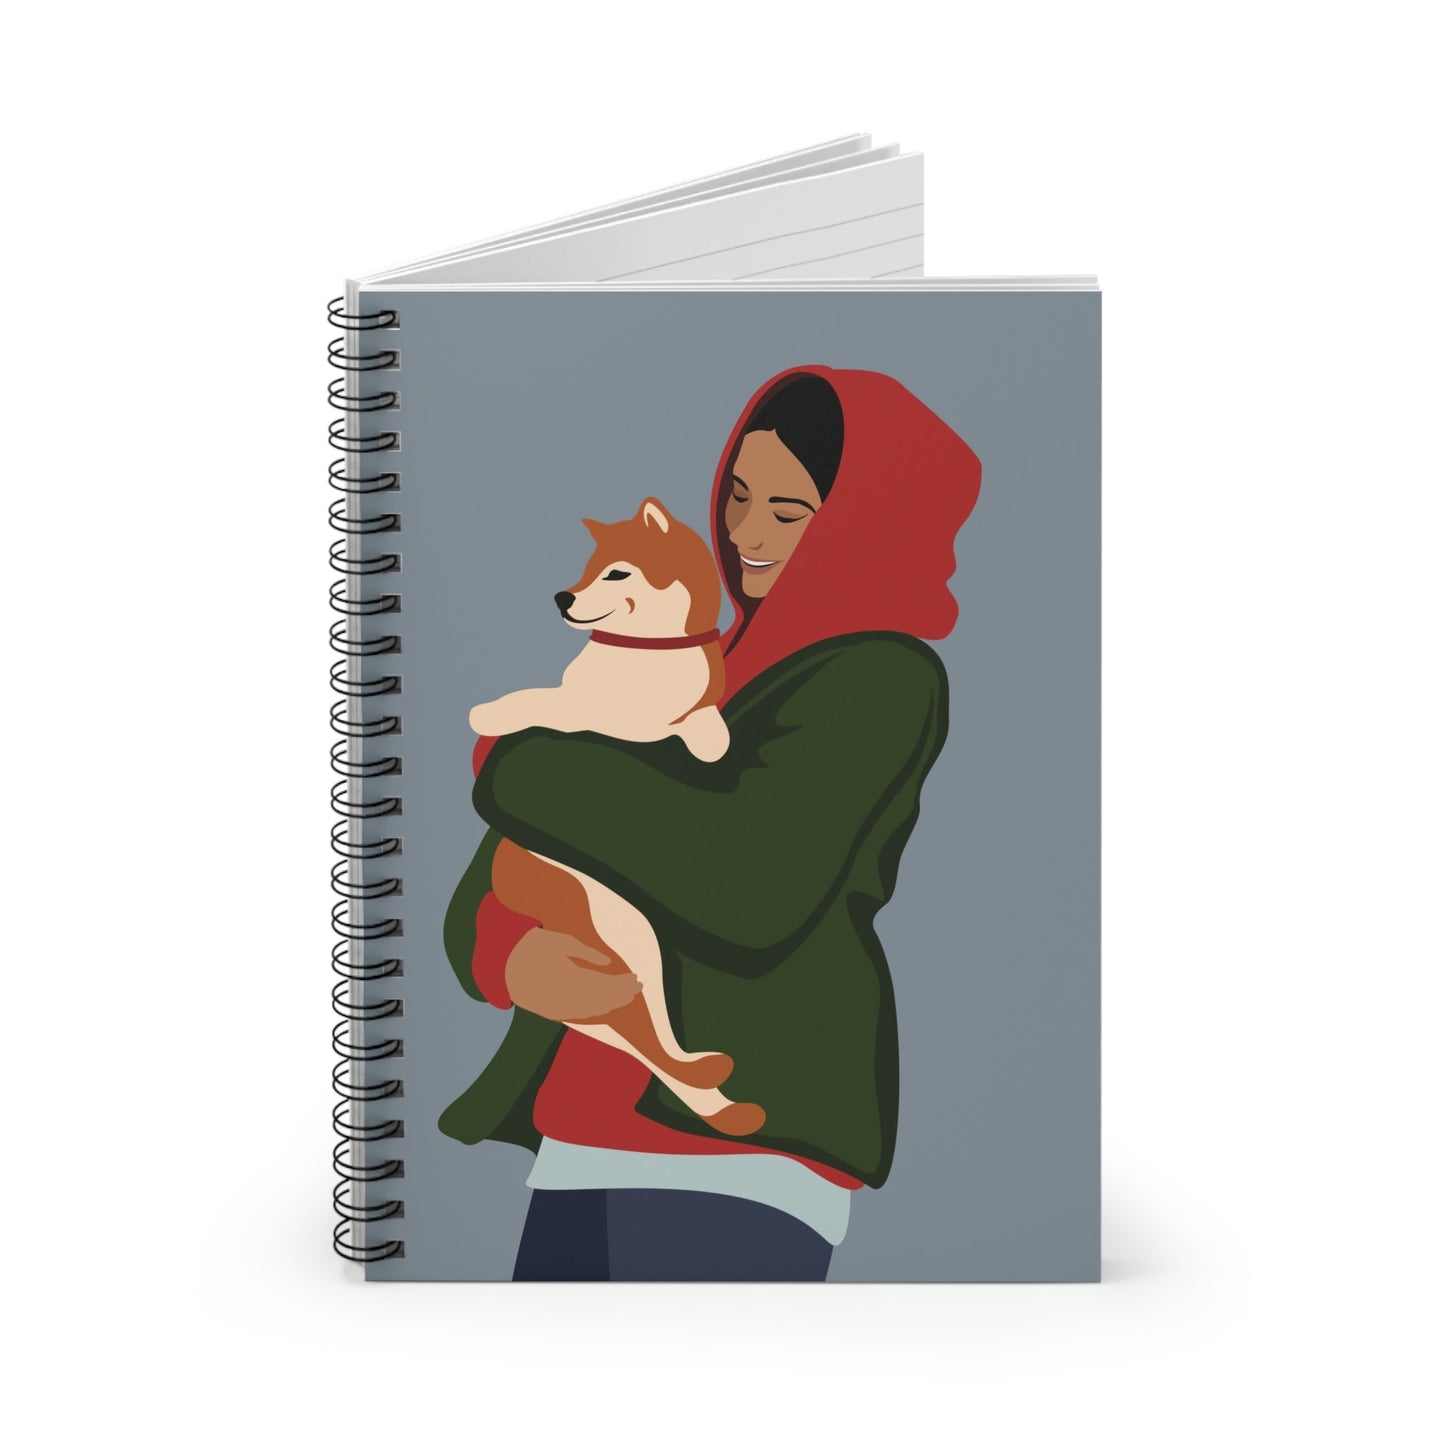 Smiling Woman with Dog Puppy Lovers Aesthetic Classic Art Spiral Notebook - Ruled Line Ichaku [Perfect Gifts Selection]